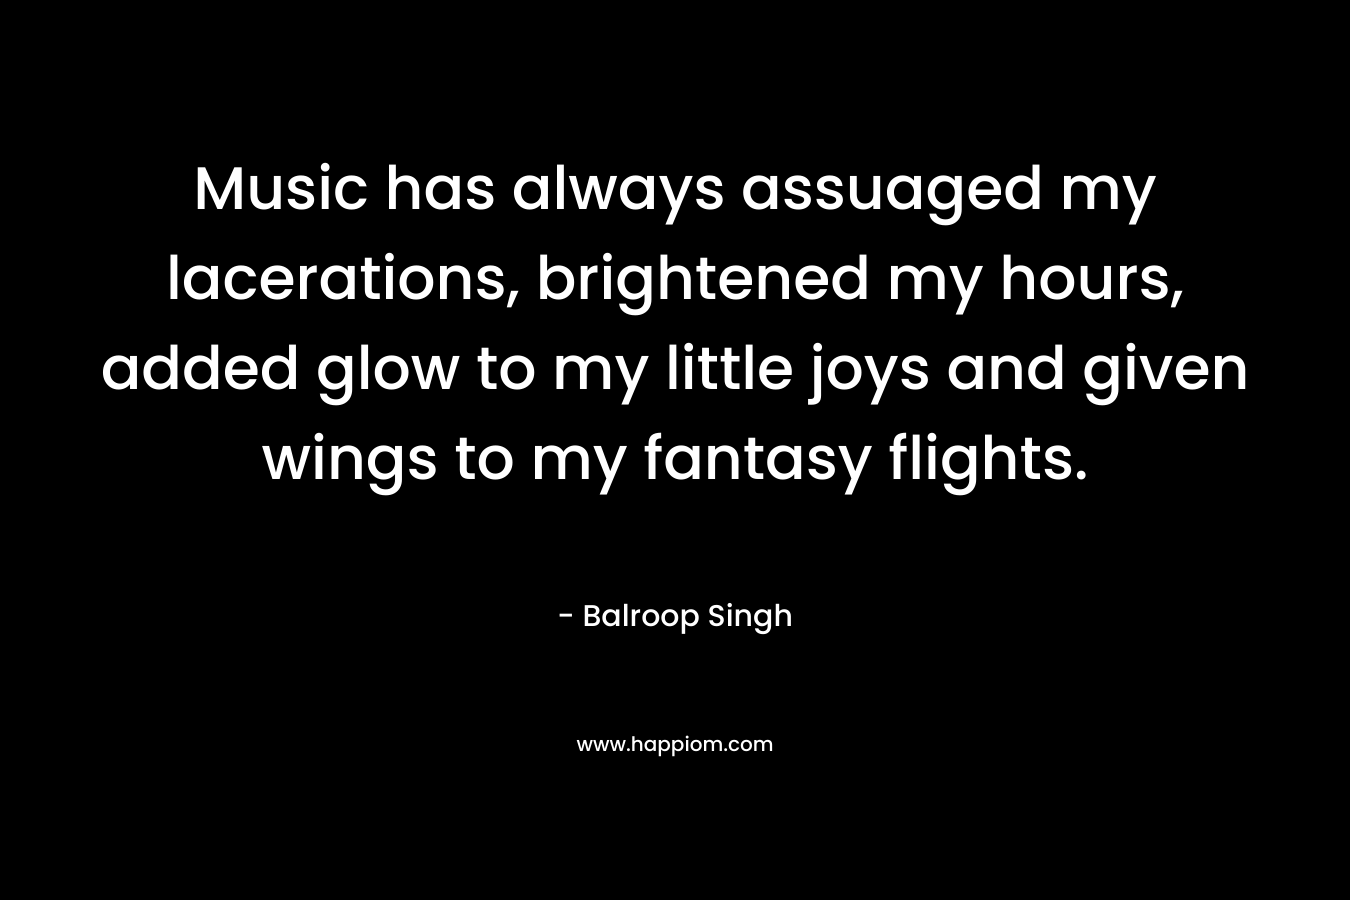 Music has always assuaged my lacerations, brightened my hours, added glow to my little joys and given wings to my fantasy flights.